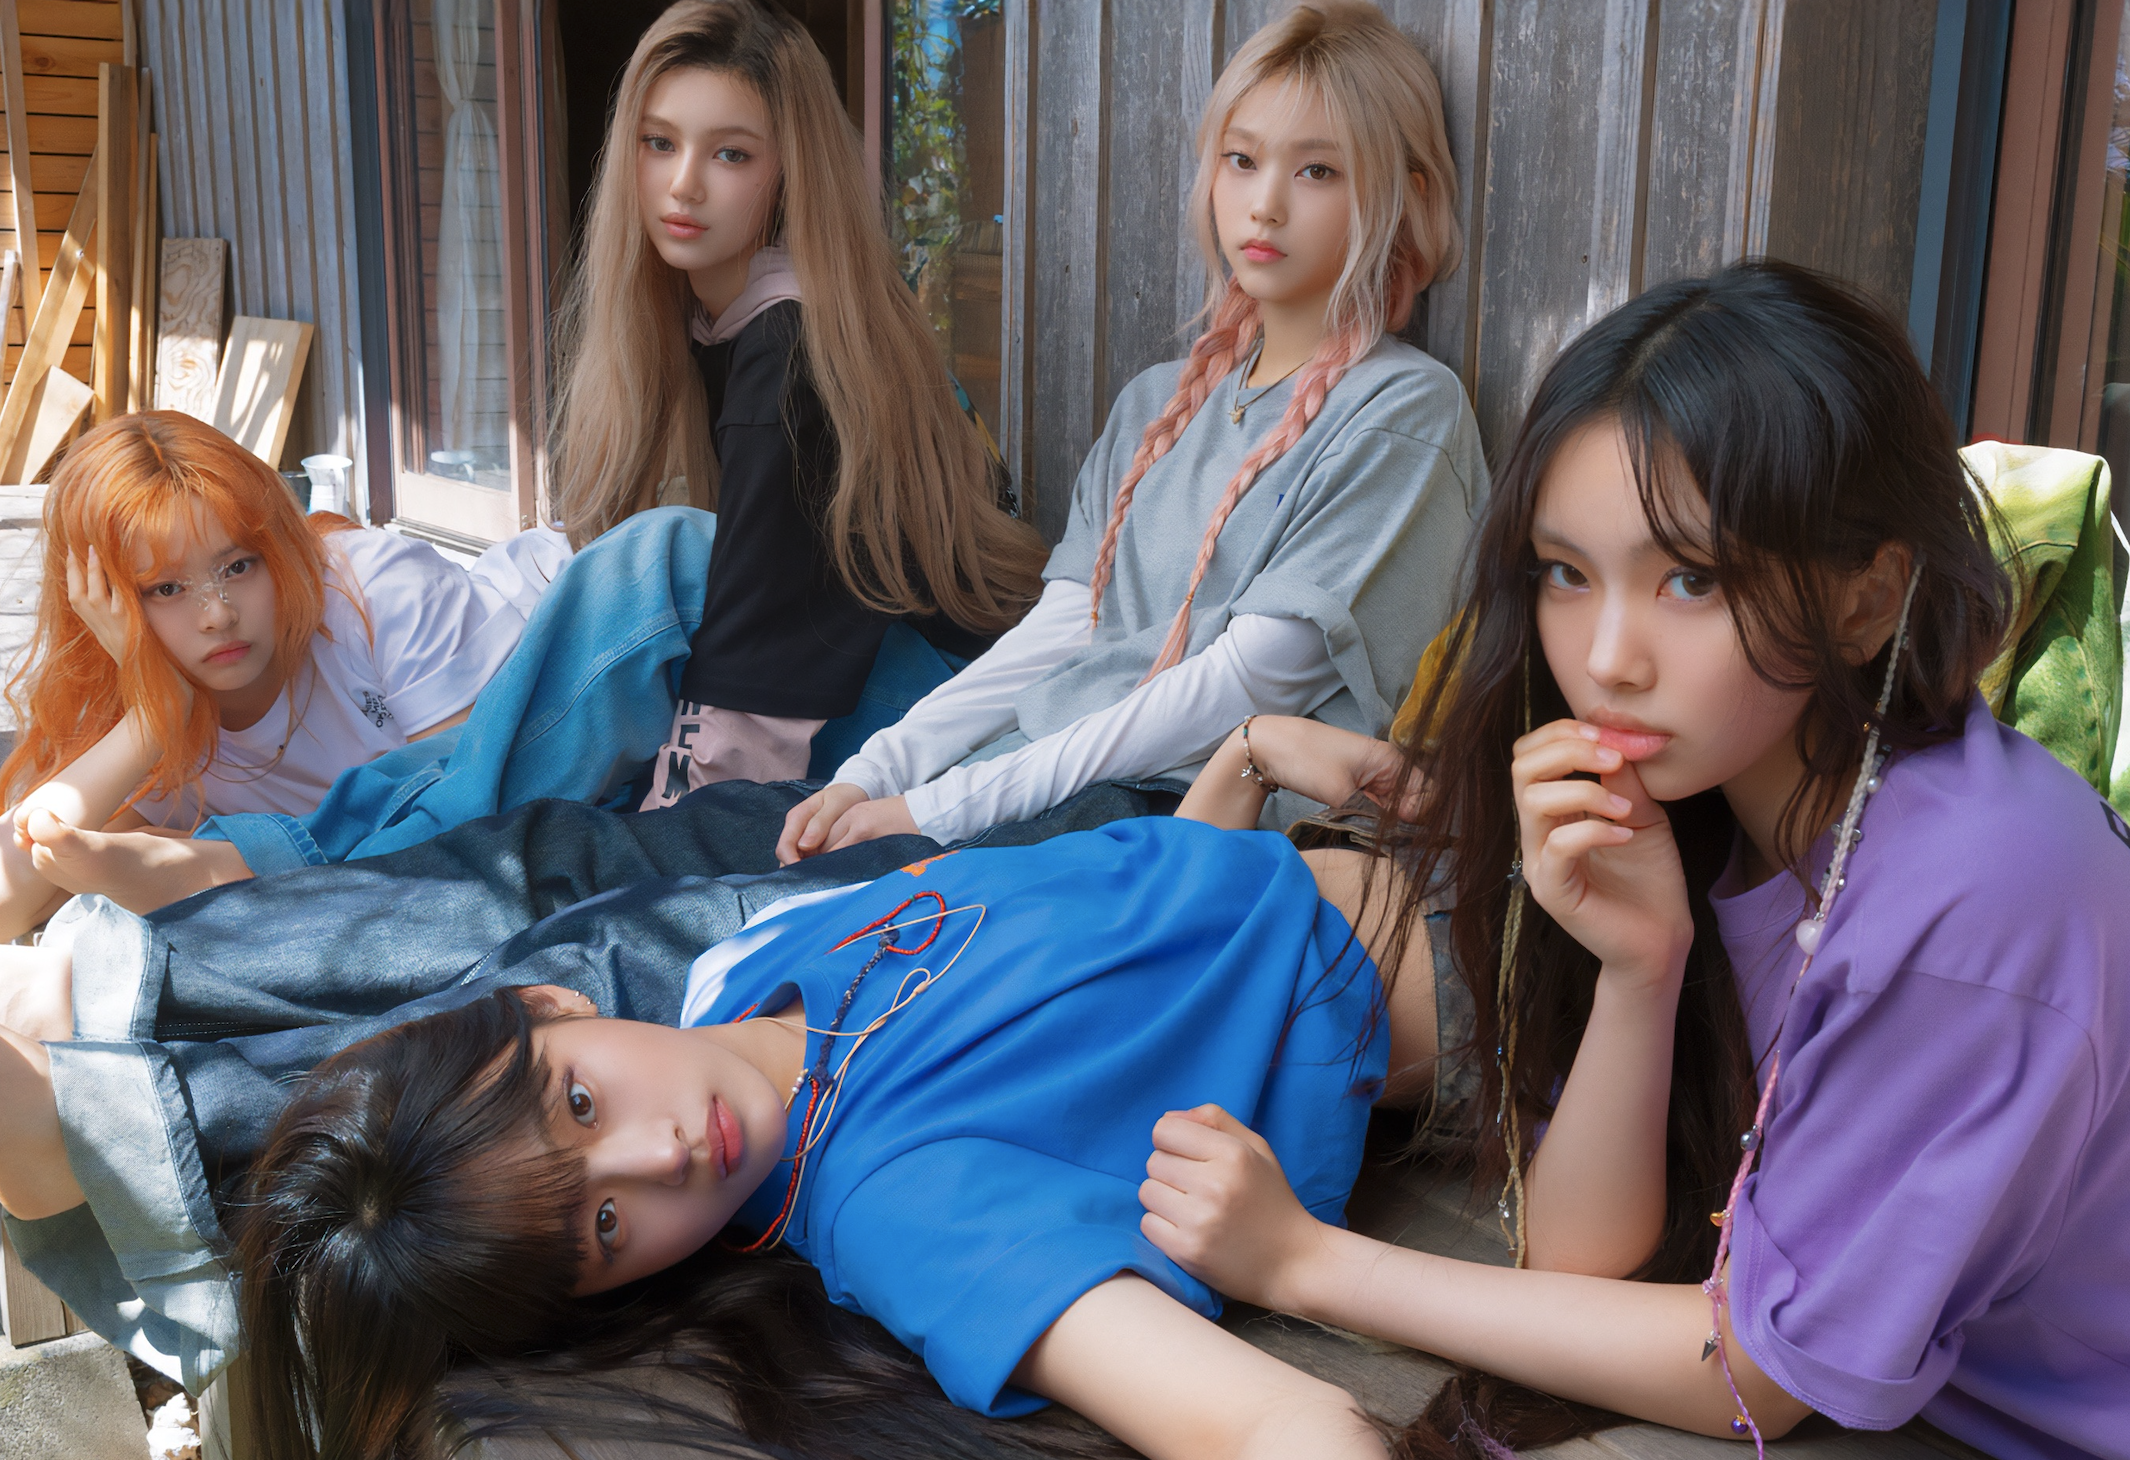 New Queens of K-pop join forces with PUBG Battlegrounds and NewJeans for collaboration